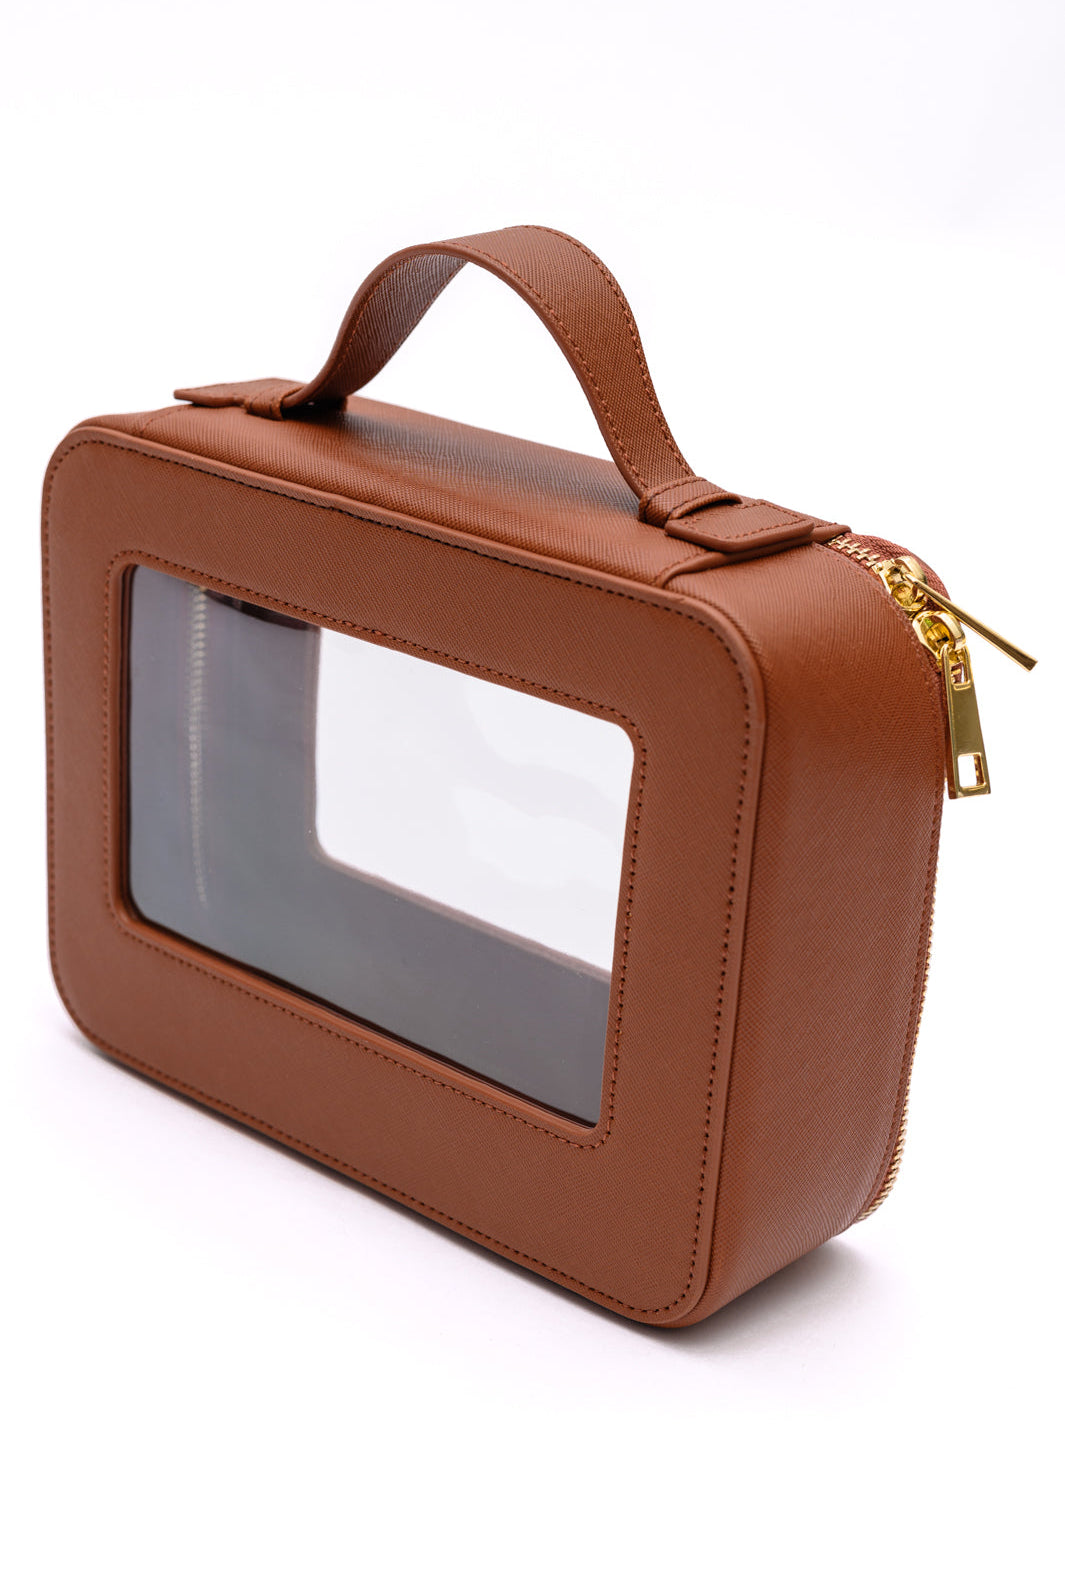 PU Leather Travel Cosmetic Case in Camel-Ave Shops-Urban Threadz Boutique, Women's Fashion Boutique in Saugatuck, MI